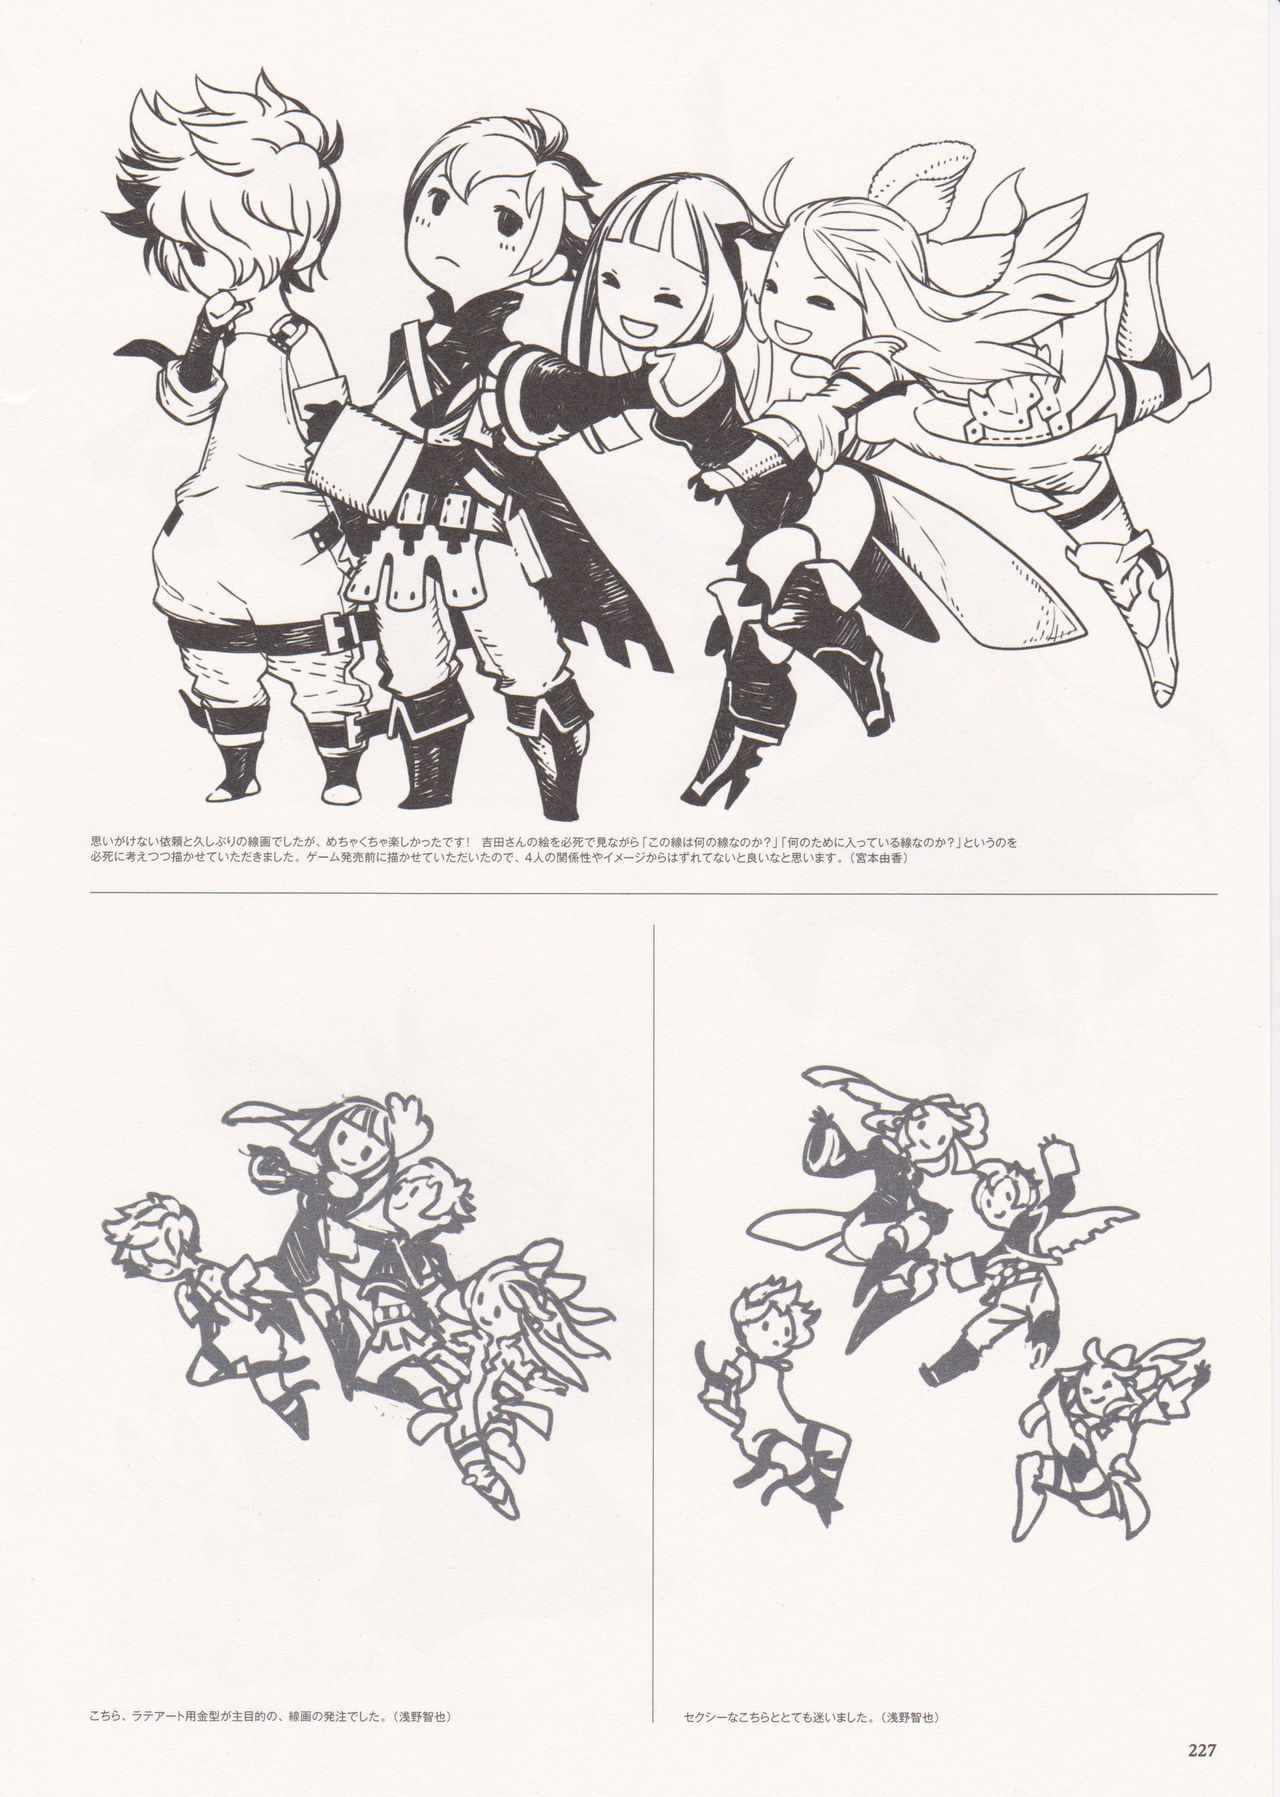 Bravely Second - End Layer - Design Works THE ART OF BRAVELY 2013-2015 226